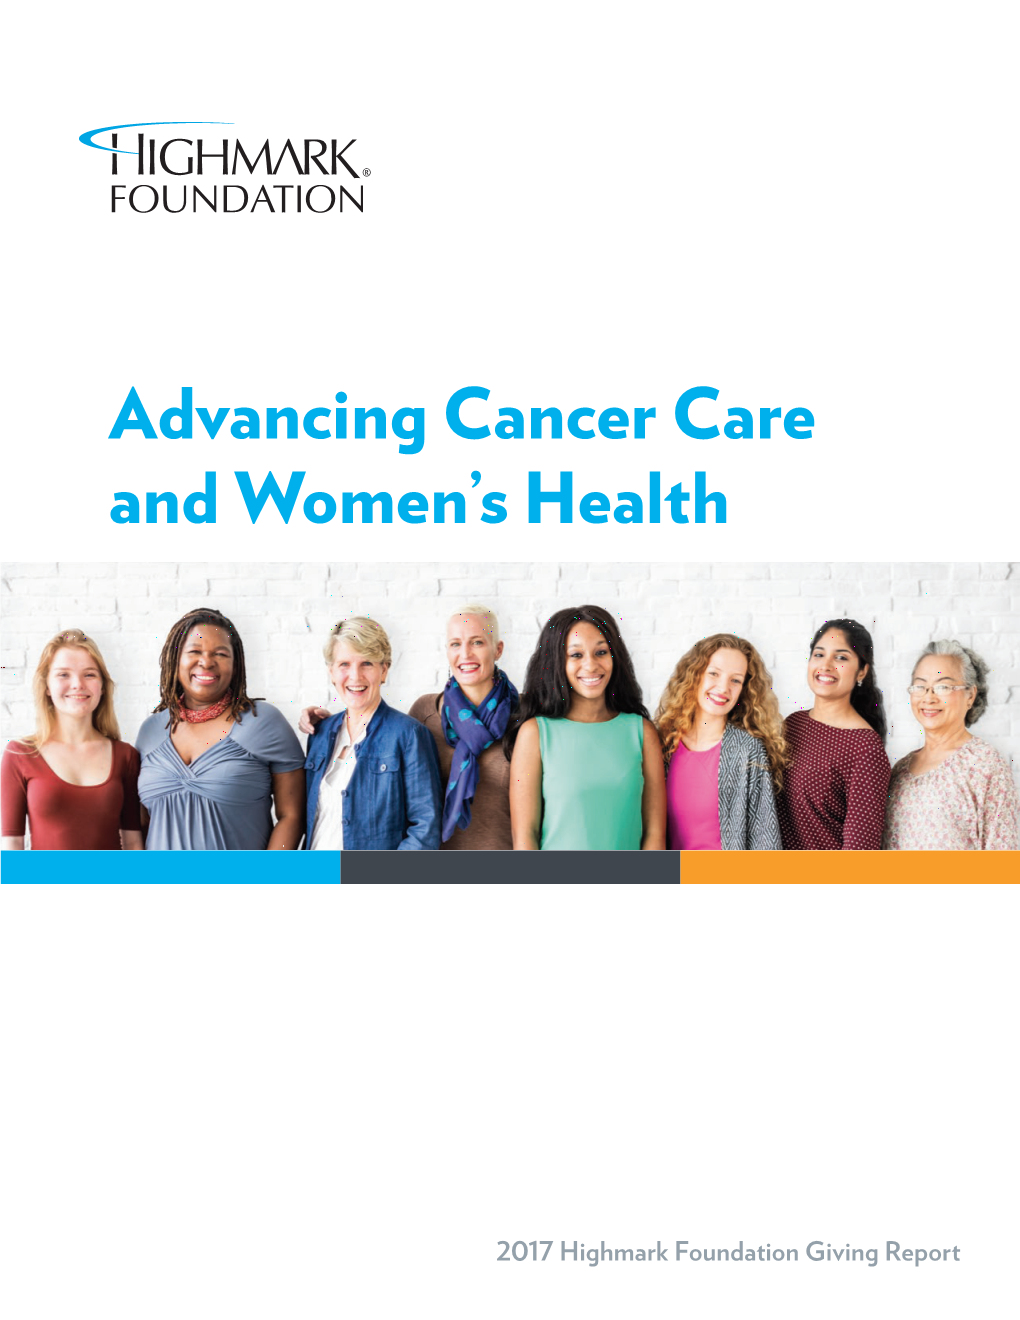 Highmark Foundation 2017 Annual Giving Report: Advancing Cancer Care and Women's Health